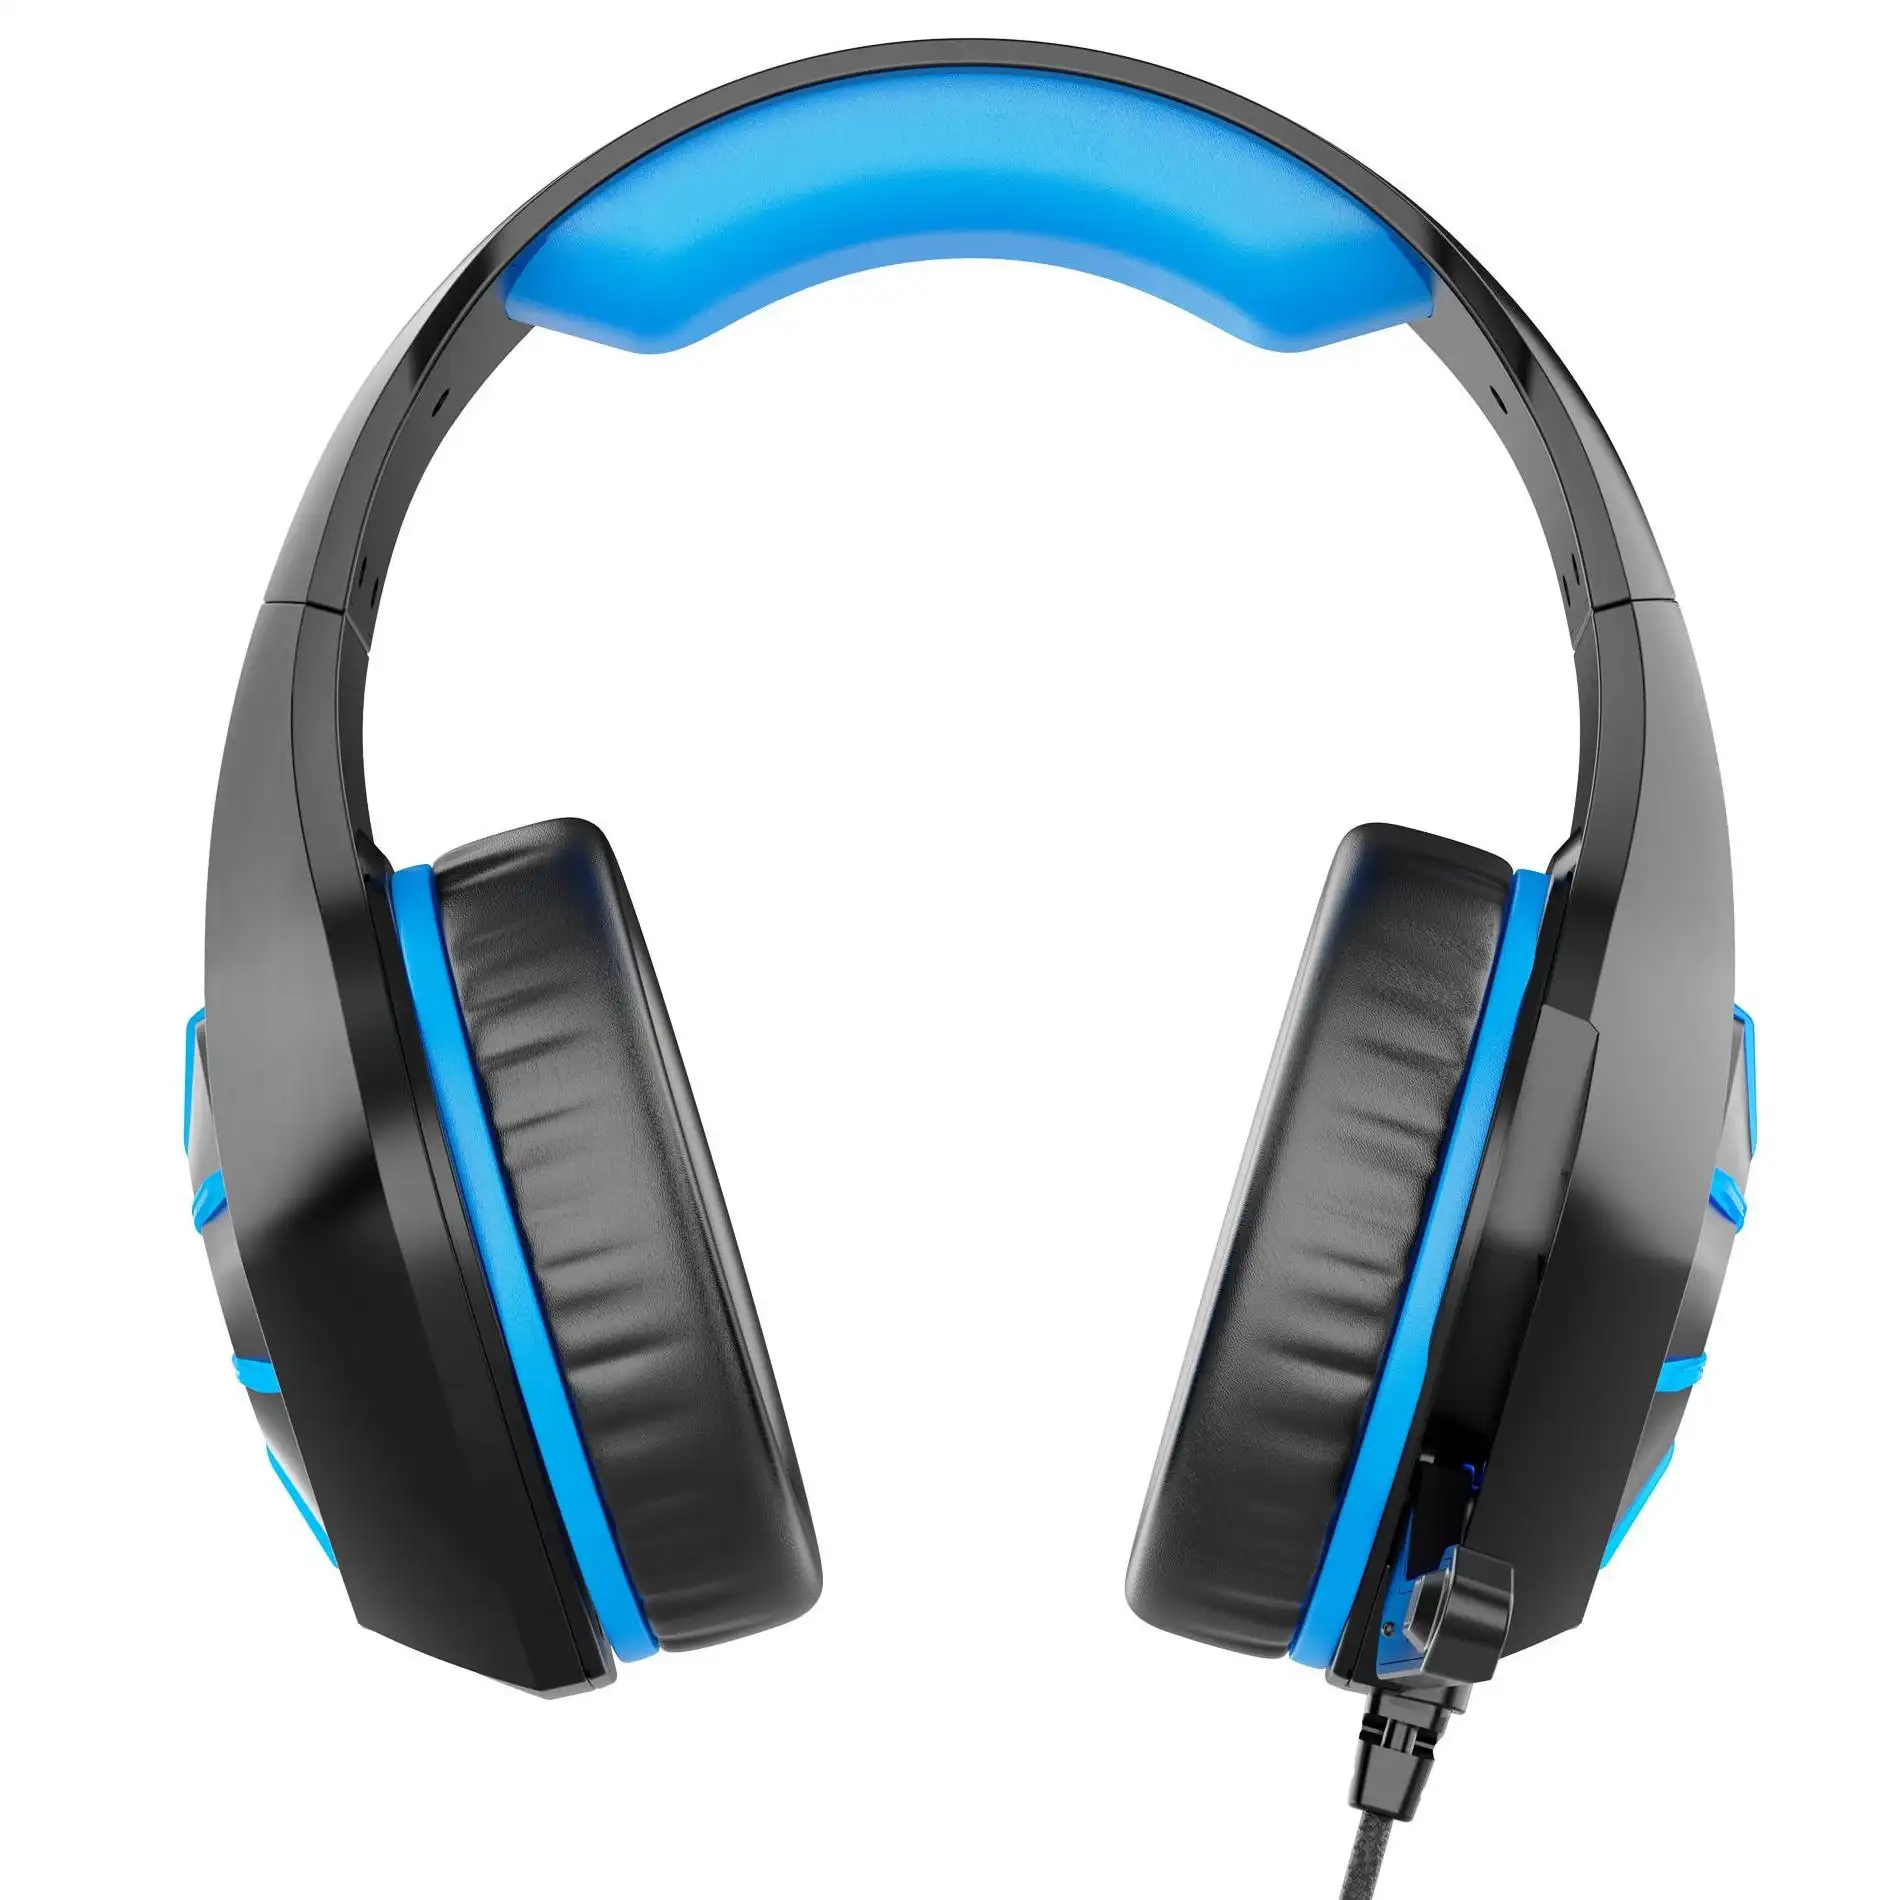 Over Ear Gaming Headphone with Noise Cancelling Mic for PC Mac PS4 PS5 Switch Xbox One Xbox Series X|S Mobile 3.5mm Jack